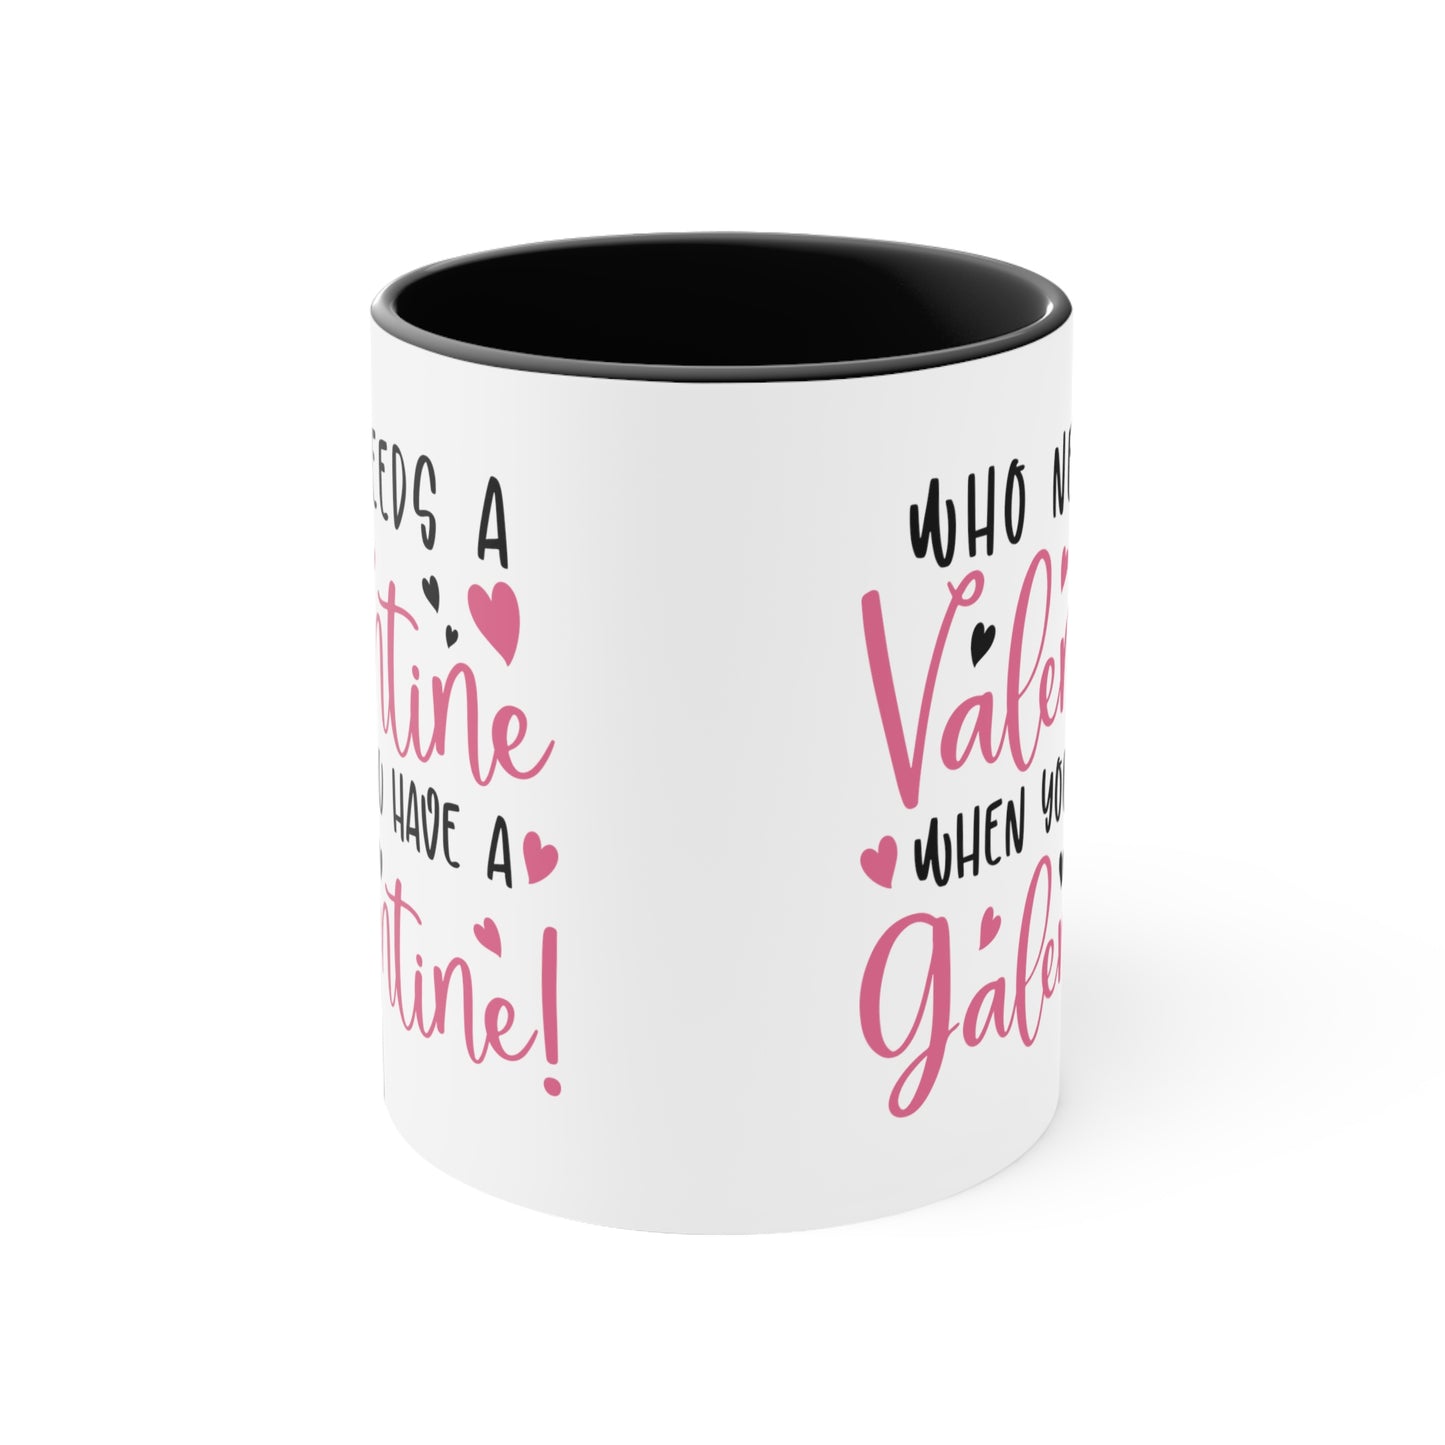 Who Needs A Valentine When you Have a Galentine Accent Mug